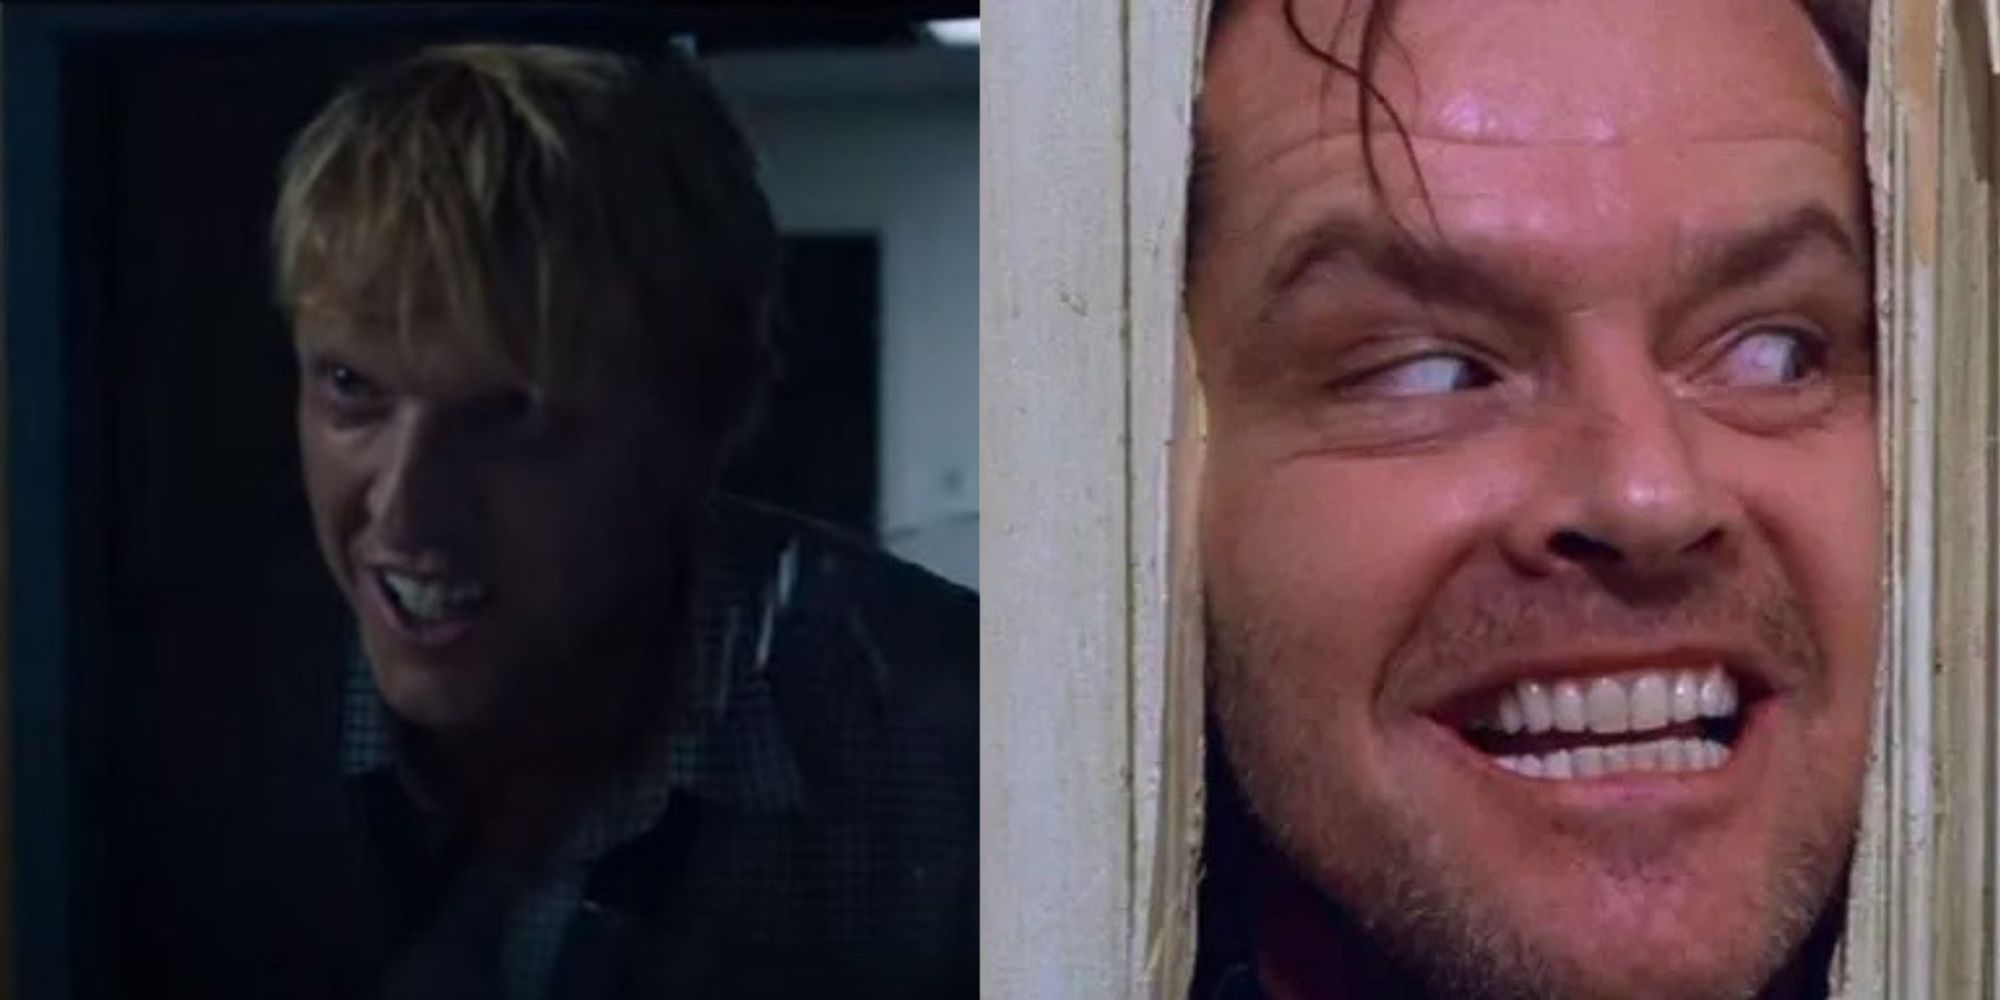 Jake-Busey-in-Stranger-Things-3-and-Jack-Nicholson-in-The-Shining-1